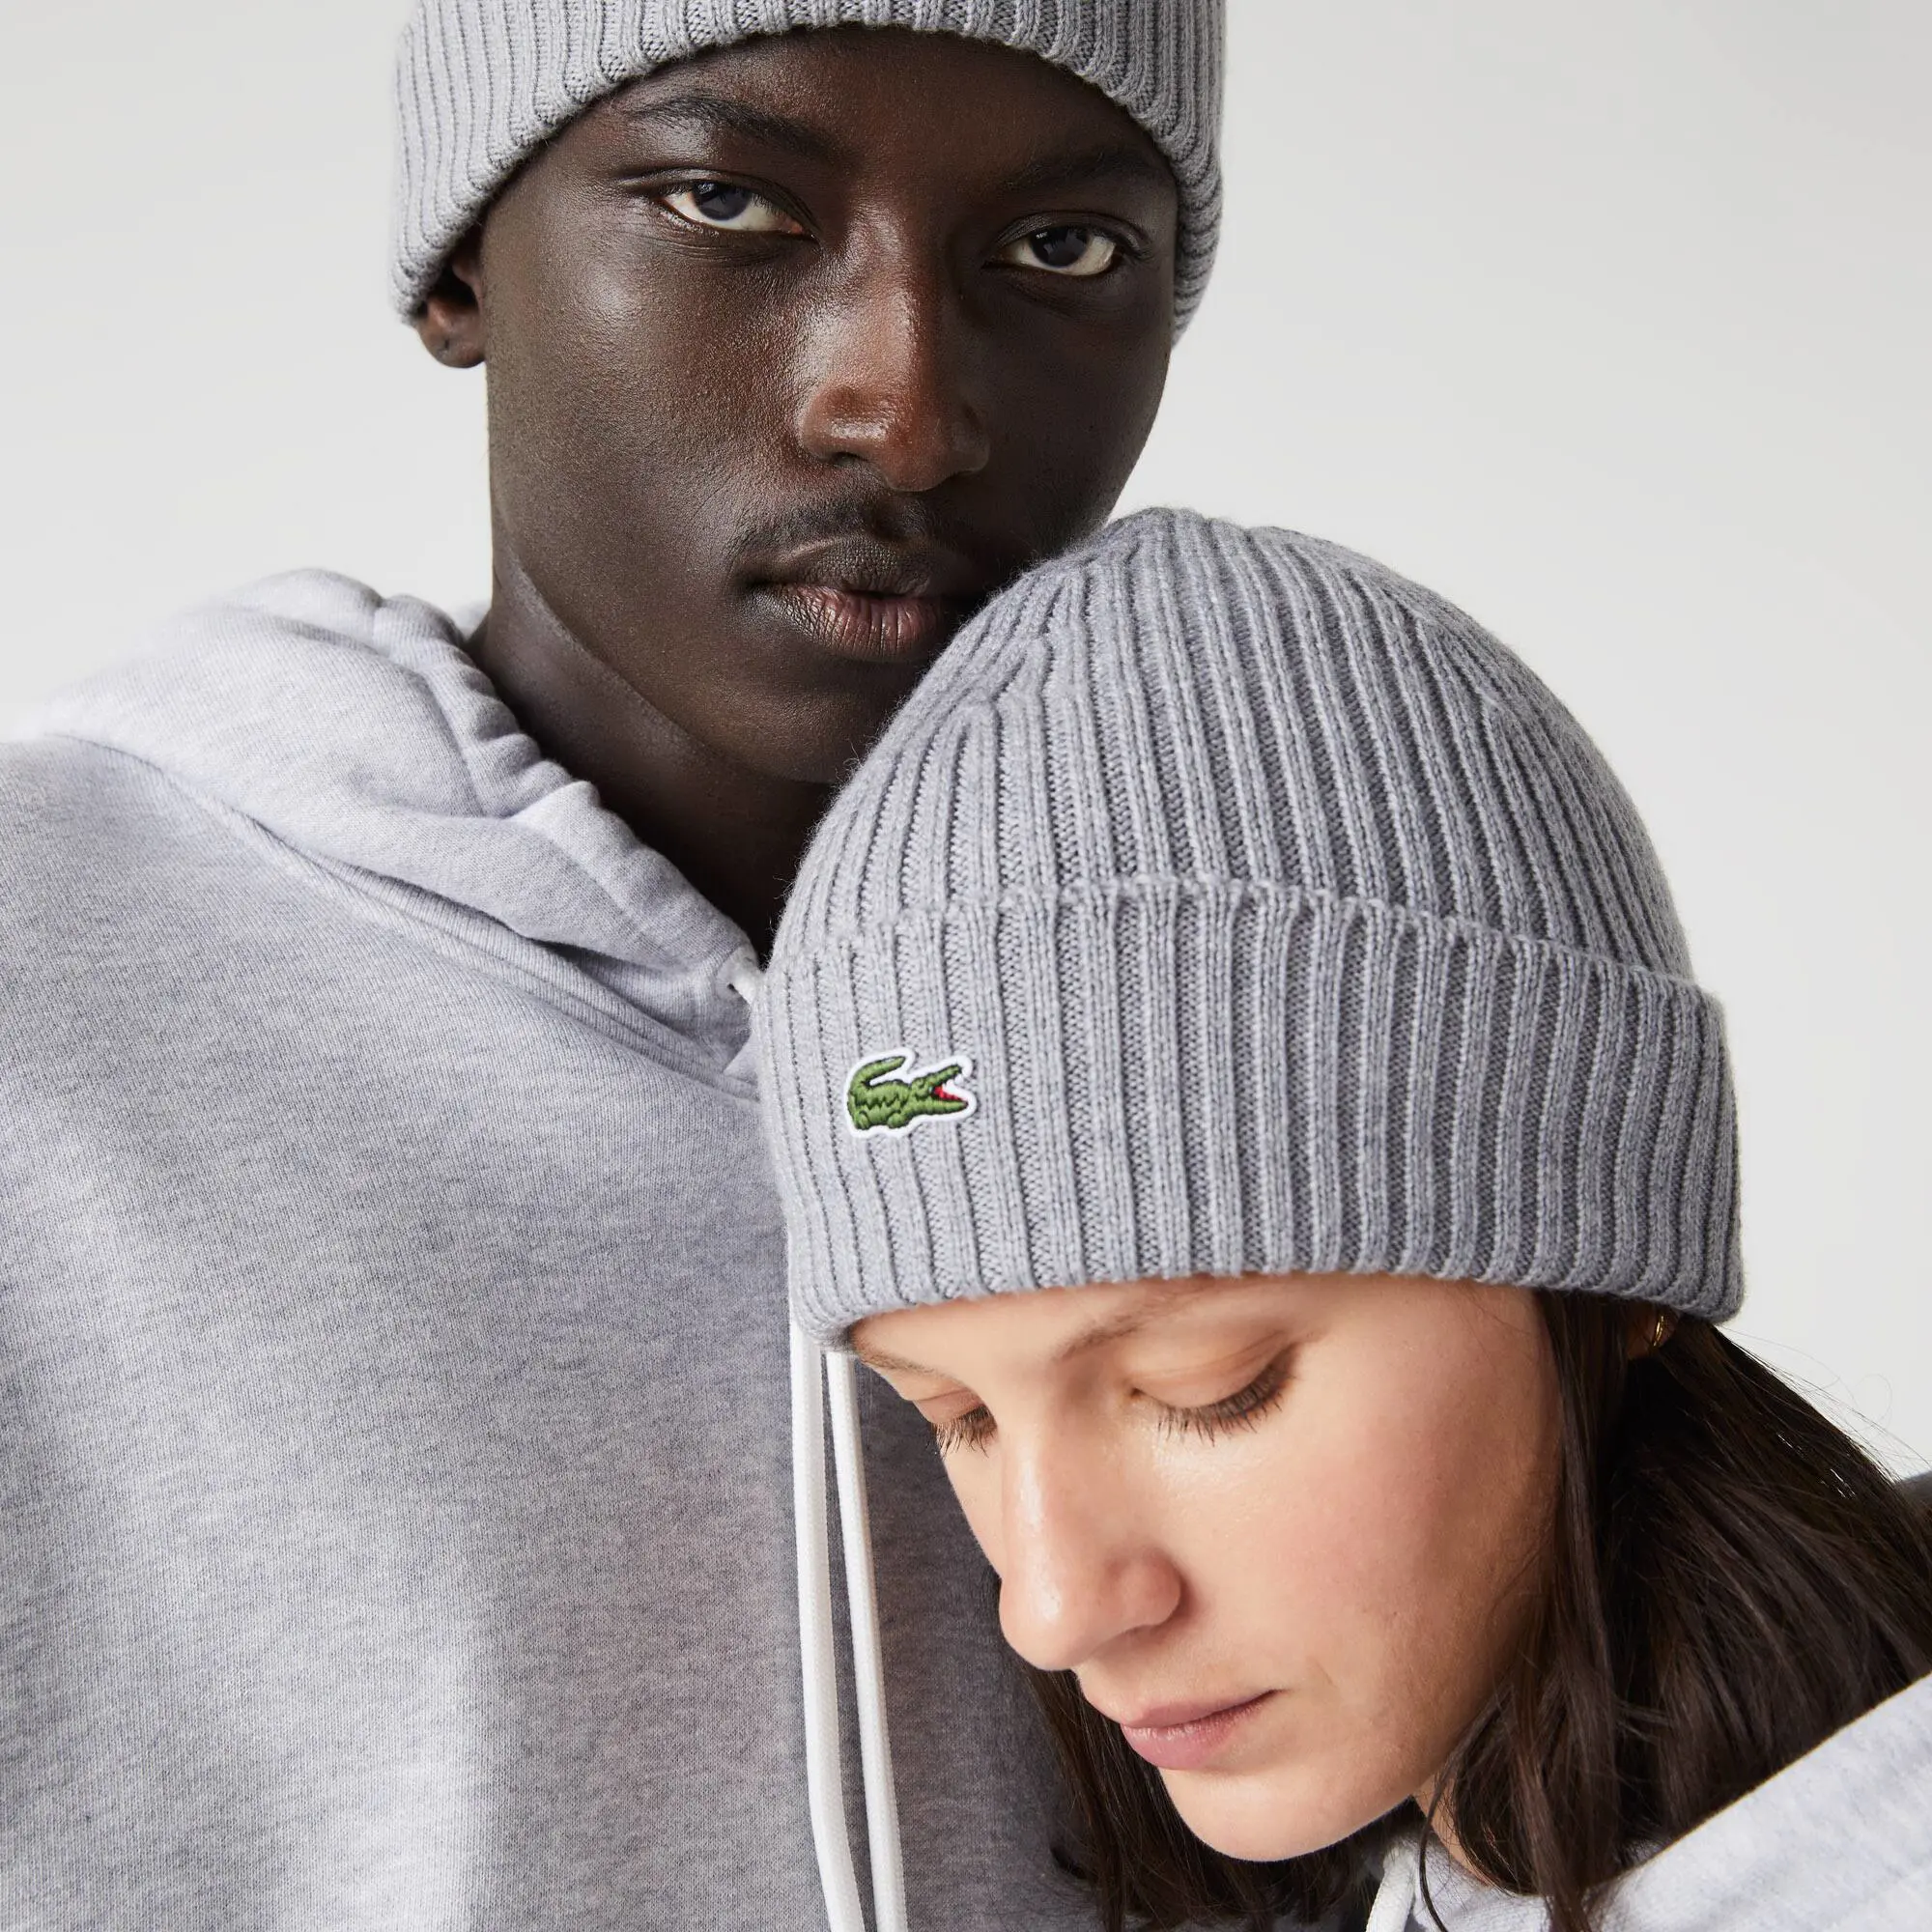 Lacoste Unisex Lacoste Ribbed Wool Beanie. 1